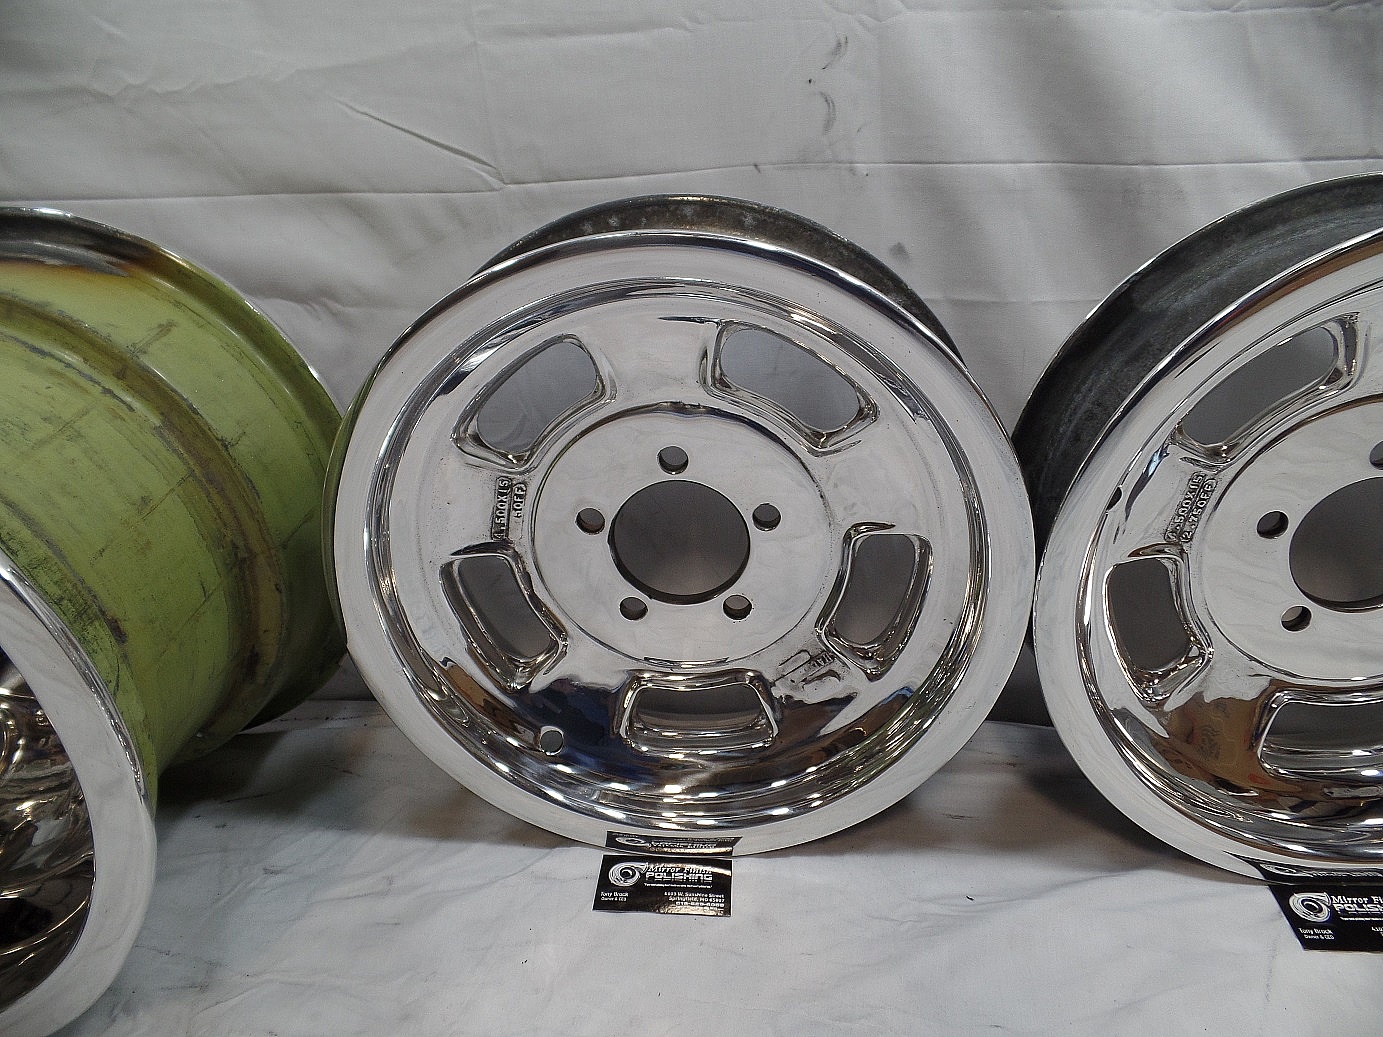 What polish should I use for these raw aluminum mirror-finished wheels? The  company I paid $500 to polish the wheel lips didn't give me a  recommendation when asked jokers probably don't want their “secret” out,  but the wheels need maintenance to